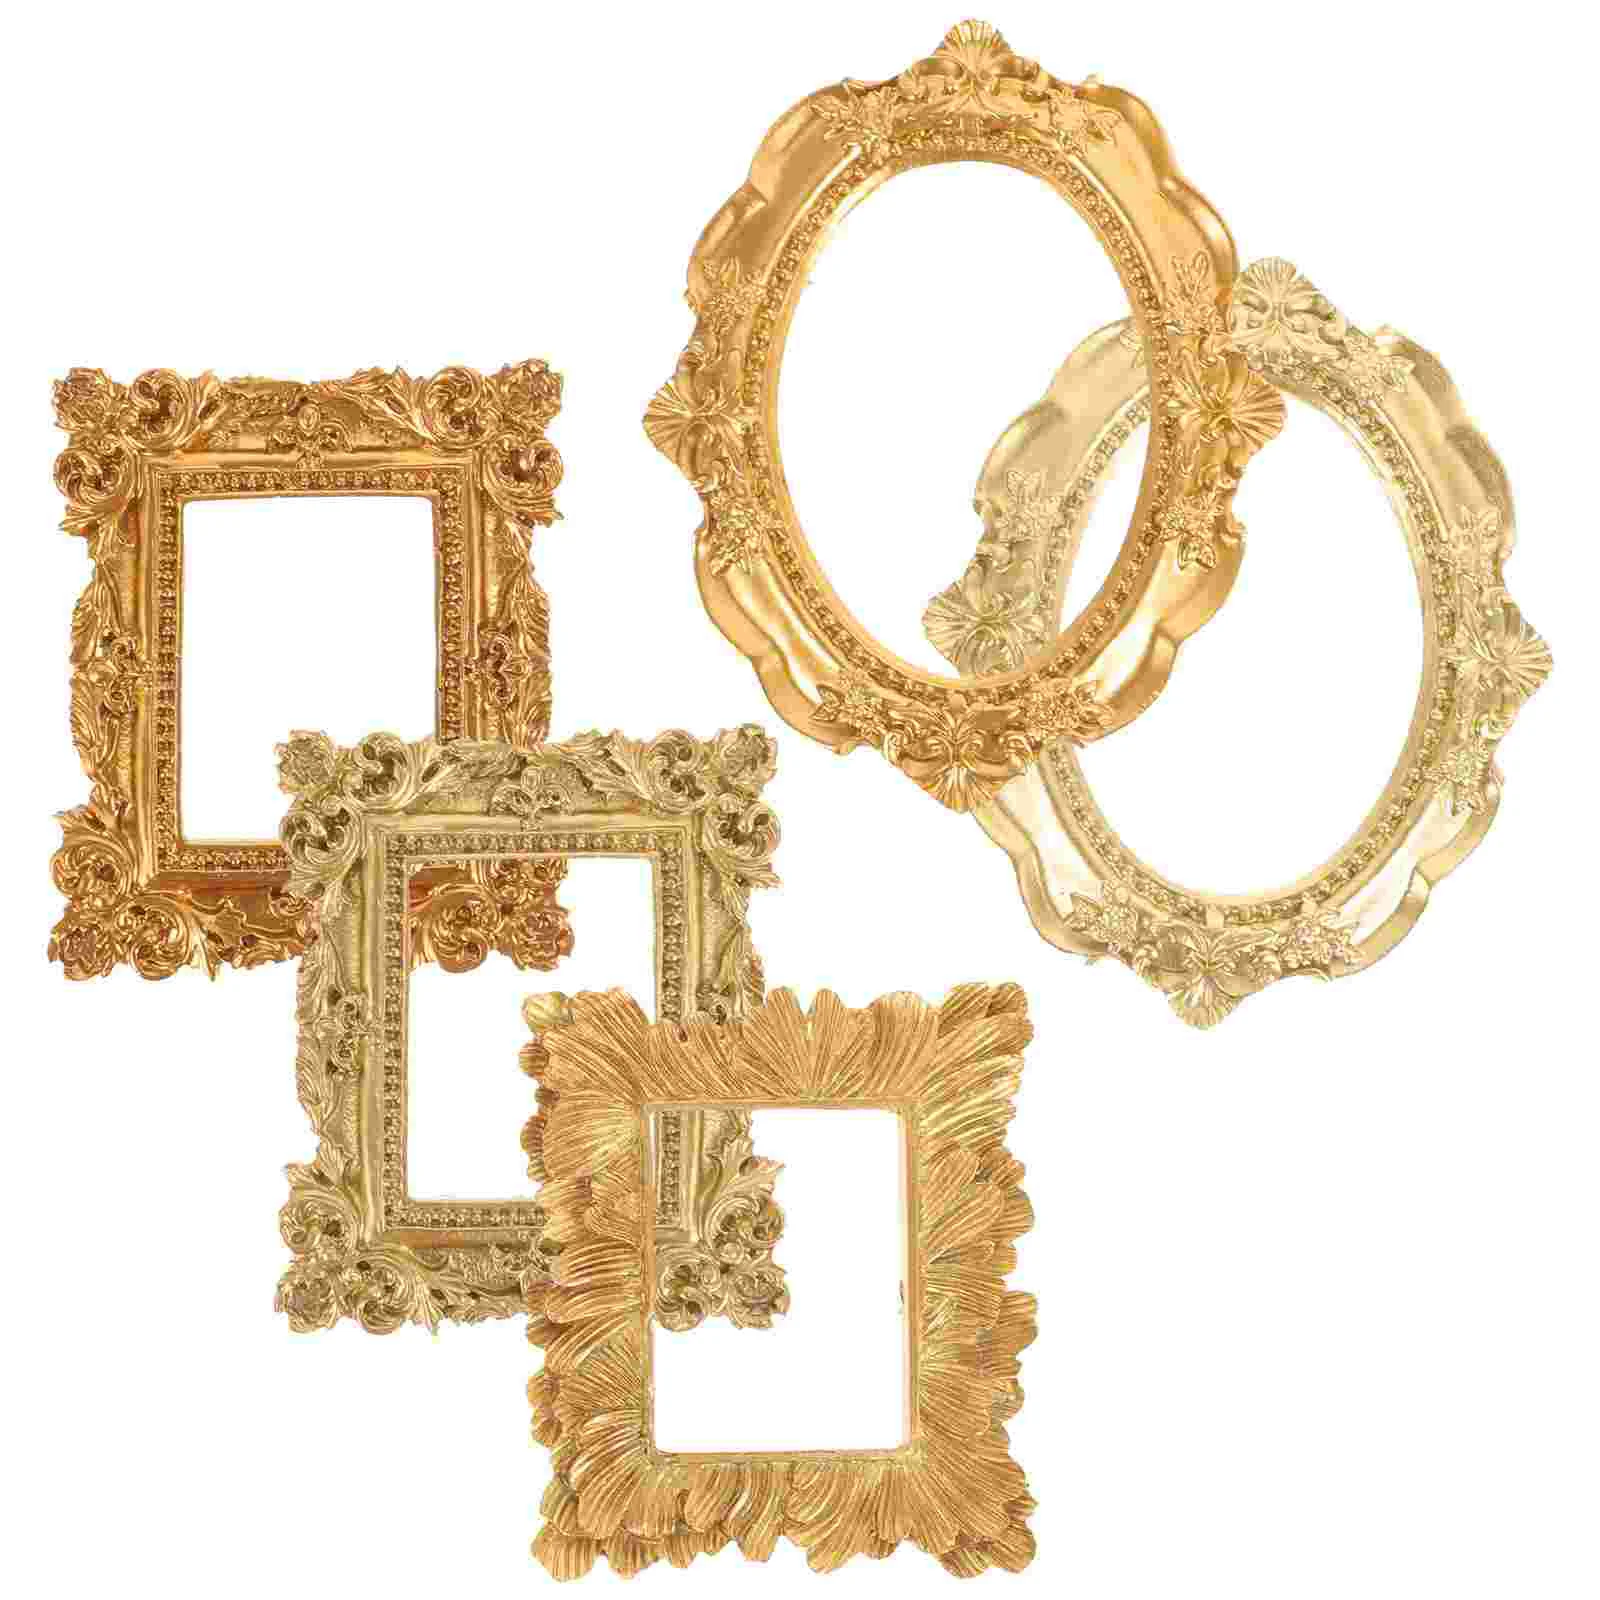 

5 Pcs Photography Props Frame Jewelry Frames Display DIY Ornaments Mini Picture Bulk Vintage Posing Resin Decorative